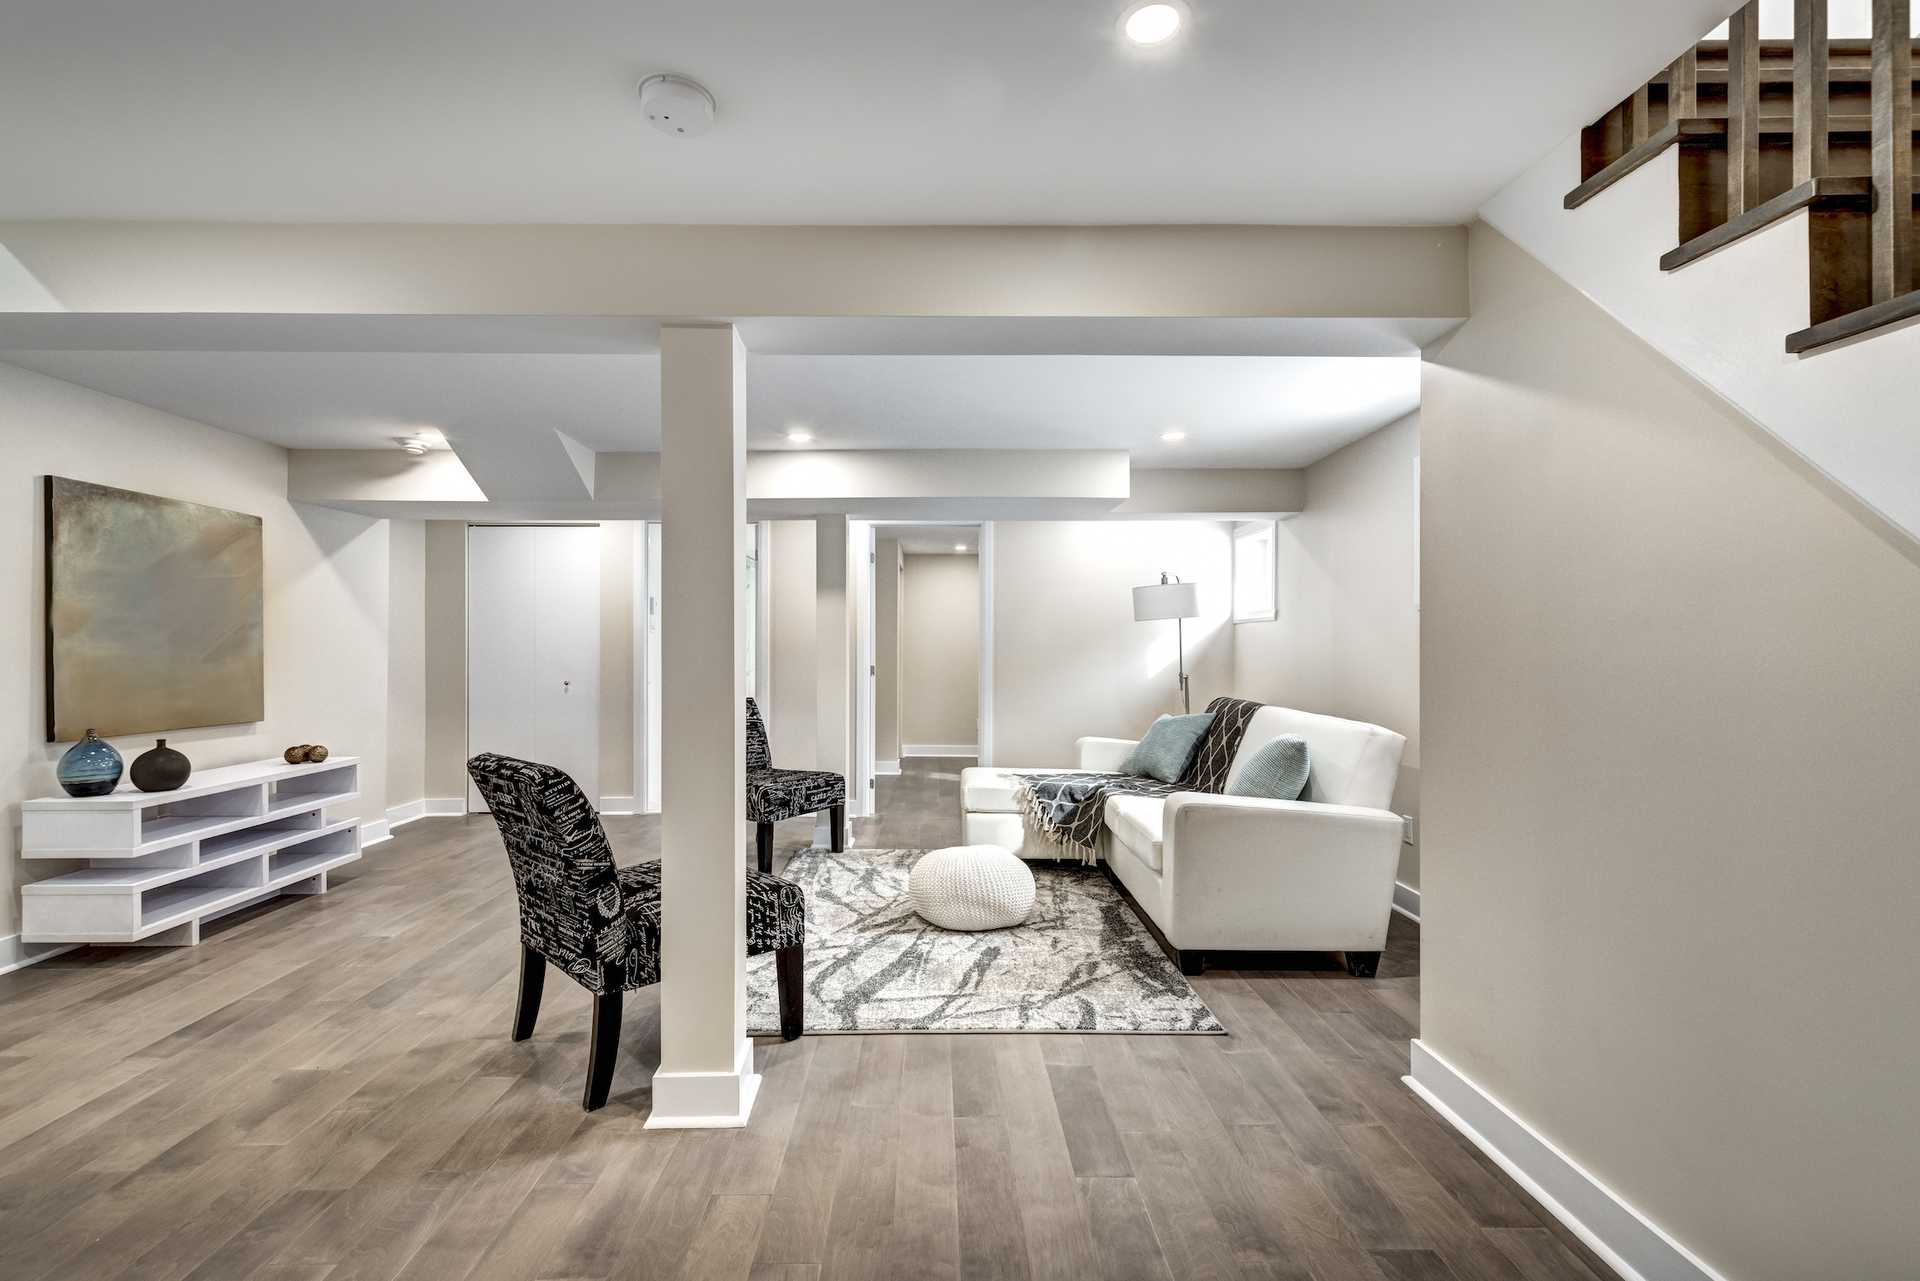 Transform Your Space with Leading Basement Remodeling Companies in Mission Hills